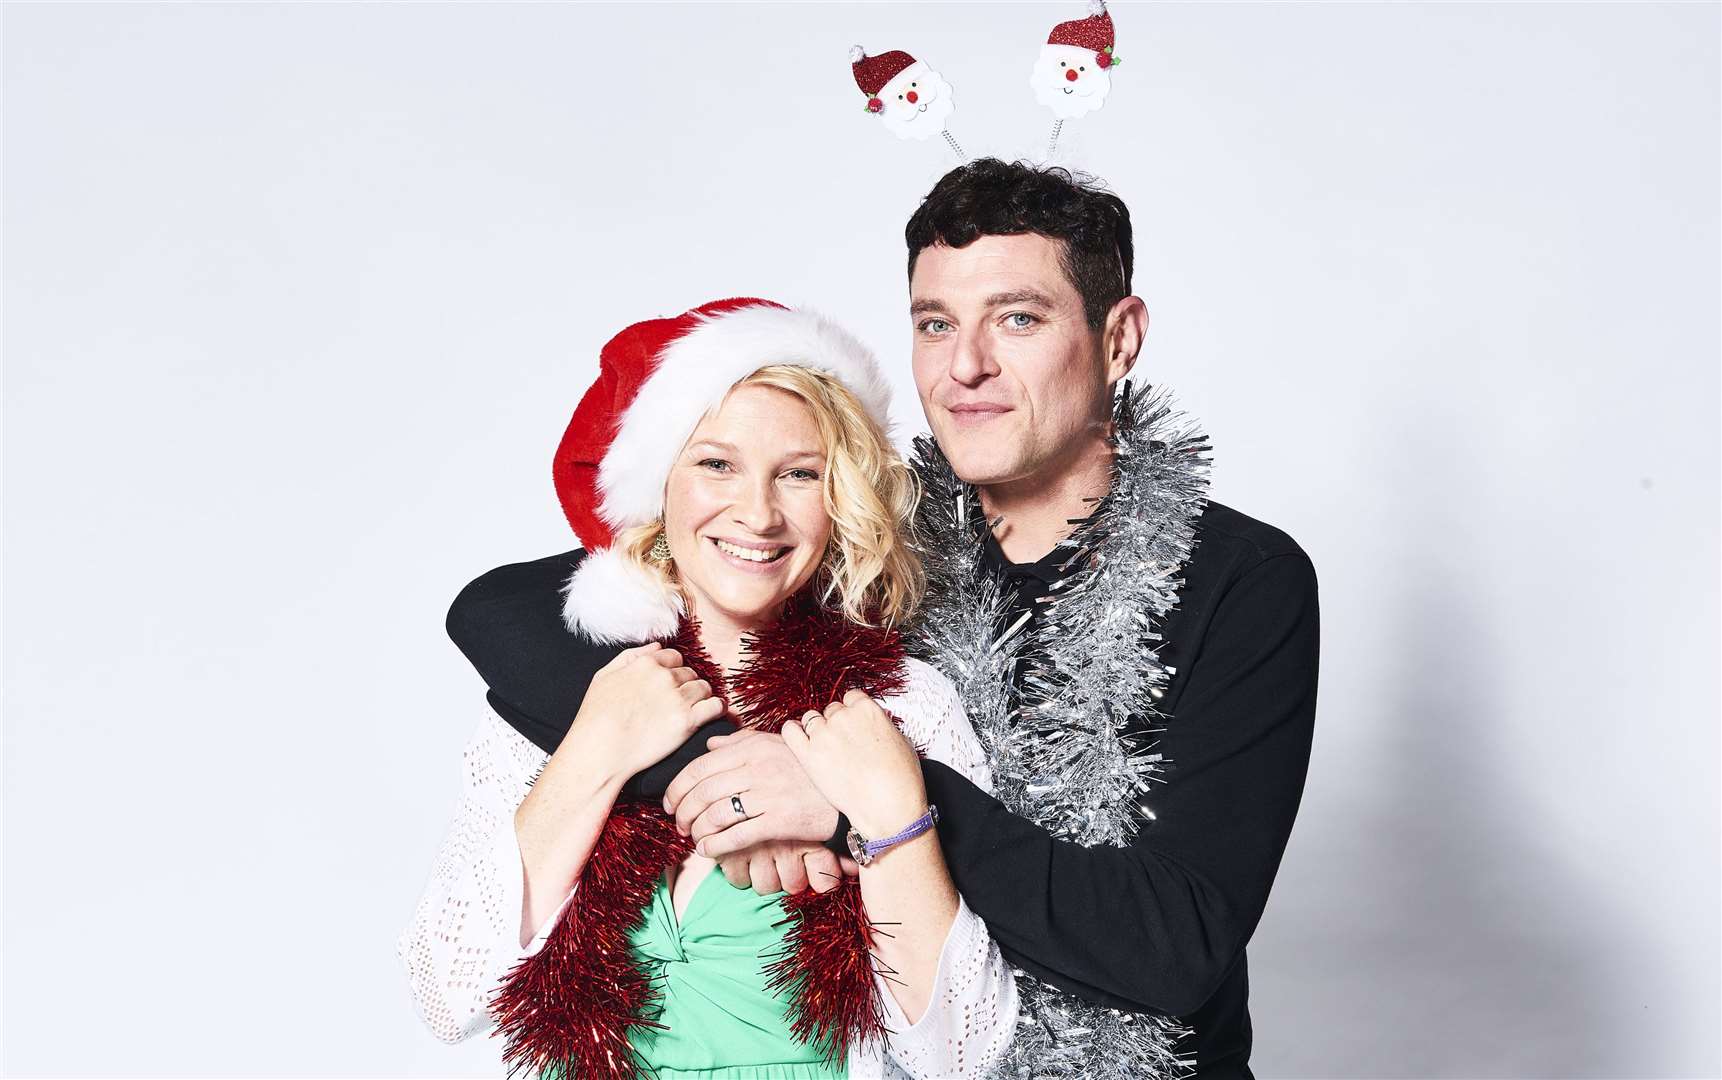 Read all about the Gavin & Stacey Christmas special in your local KM paper, starring Joanna Page as Stacey Shipman and Mathew Horne as Gavin Shipman Picture: GS TV Productions Ltd/Tom Jackson